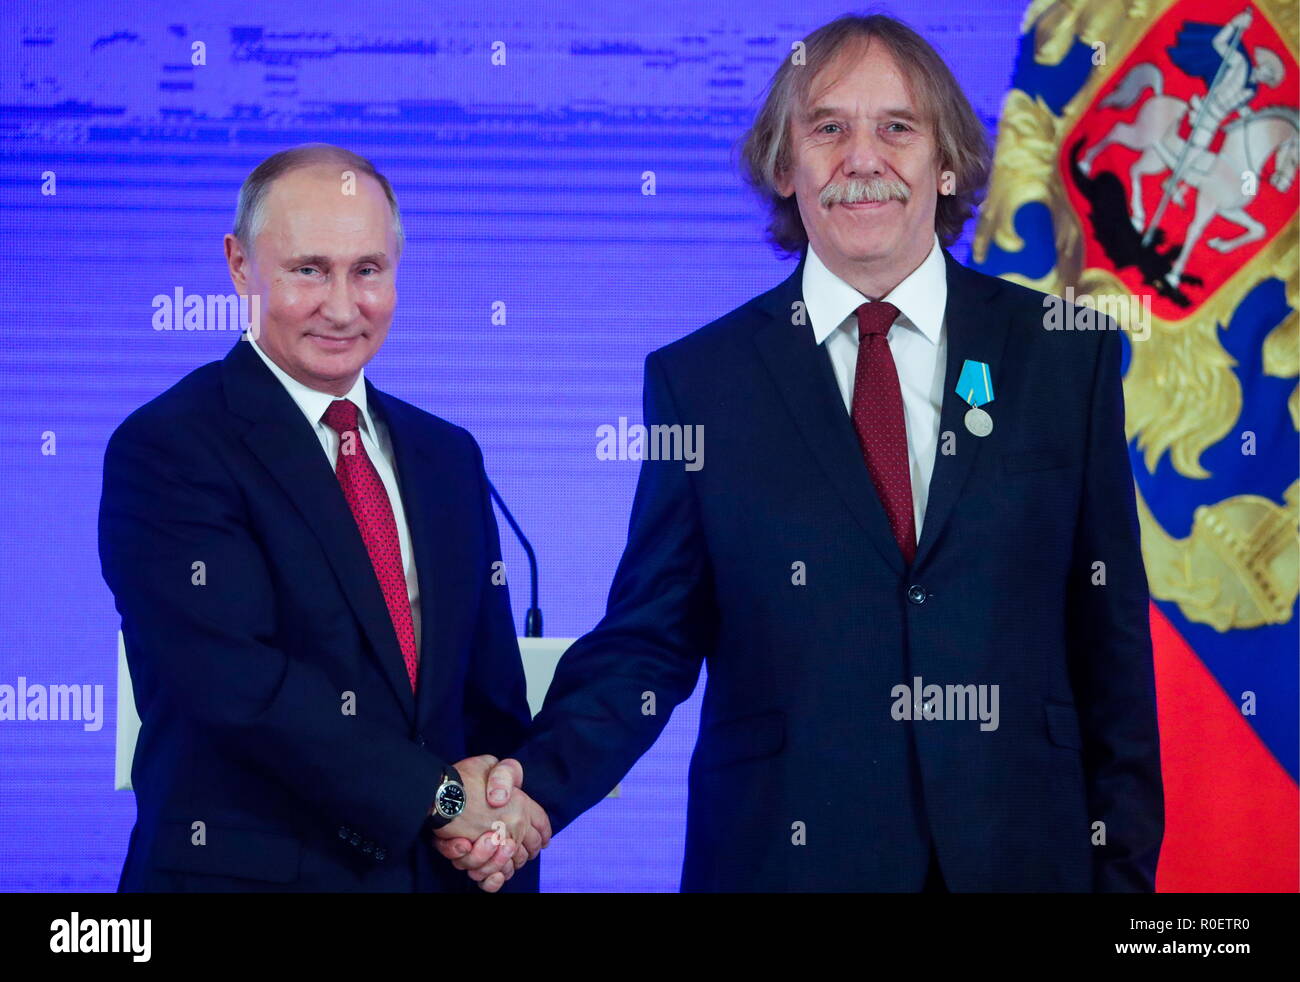 Czech songwriter and poet Jaromir Nohavica (R) receives a Medal of Pushkin  from the President of Russia Vladimir Putin at a ceremony to award foreign  nationals for their contribution to strengthening international